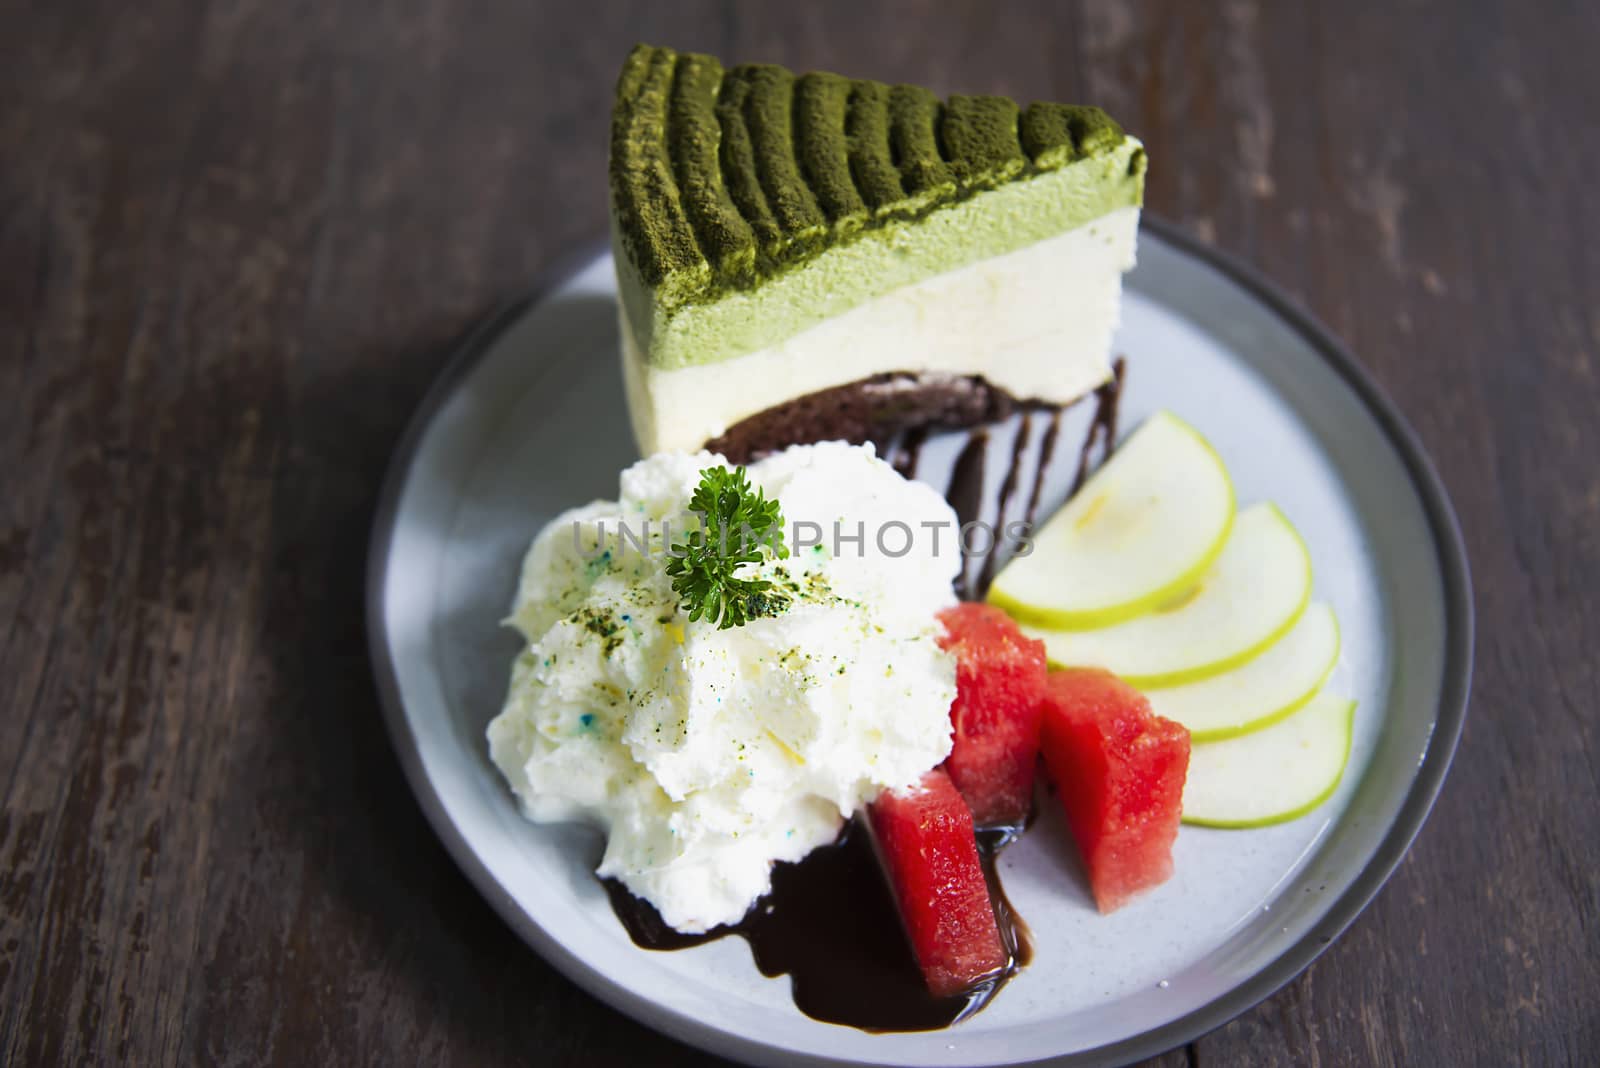 Colorful green tea favor cake with well decorated fruit pieces and whipped cream in white plate - cake recipe menu concept by pairhandmade